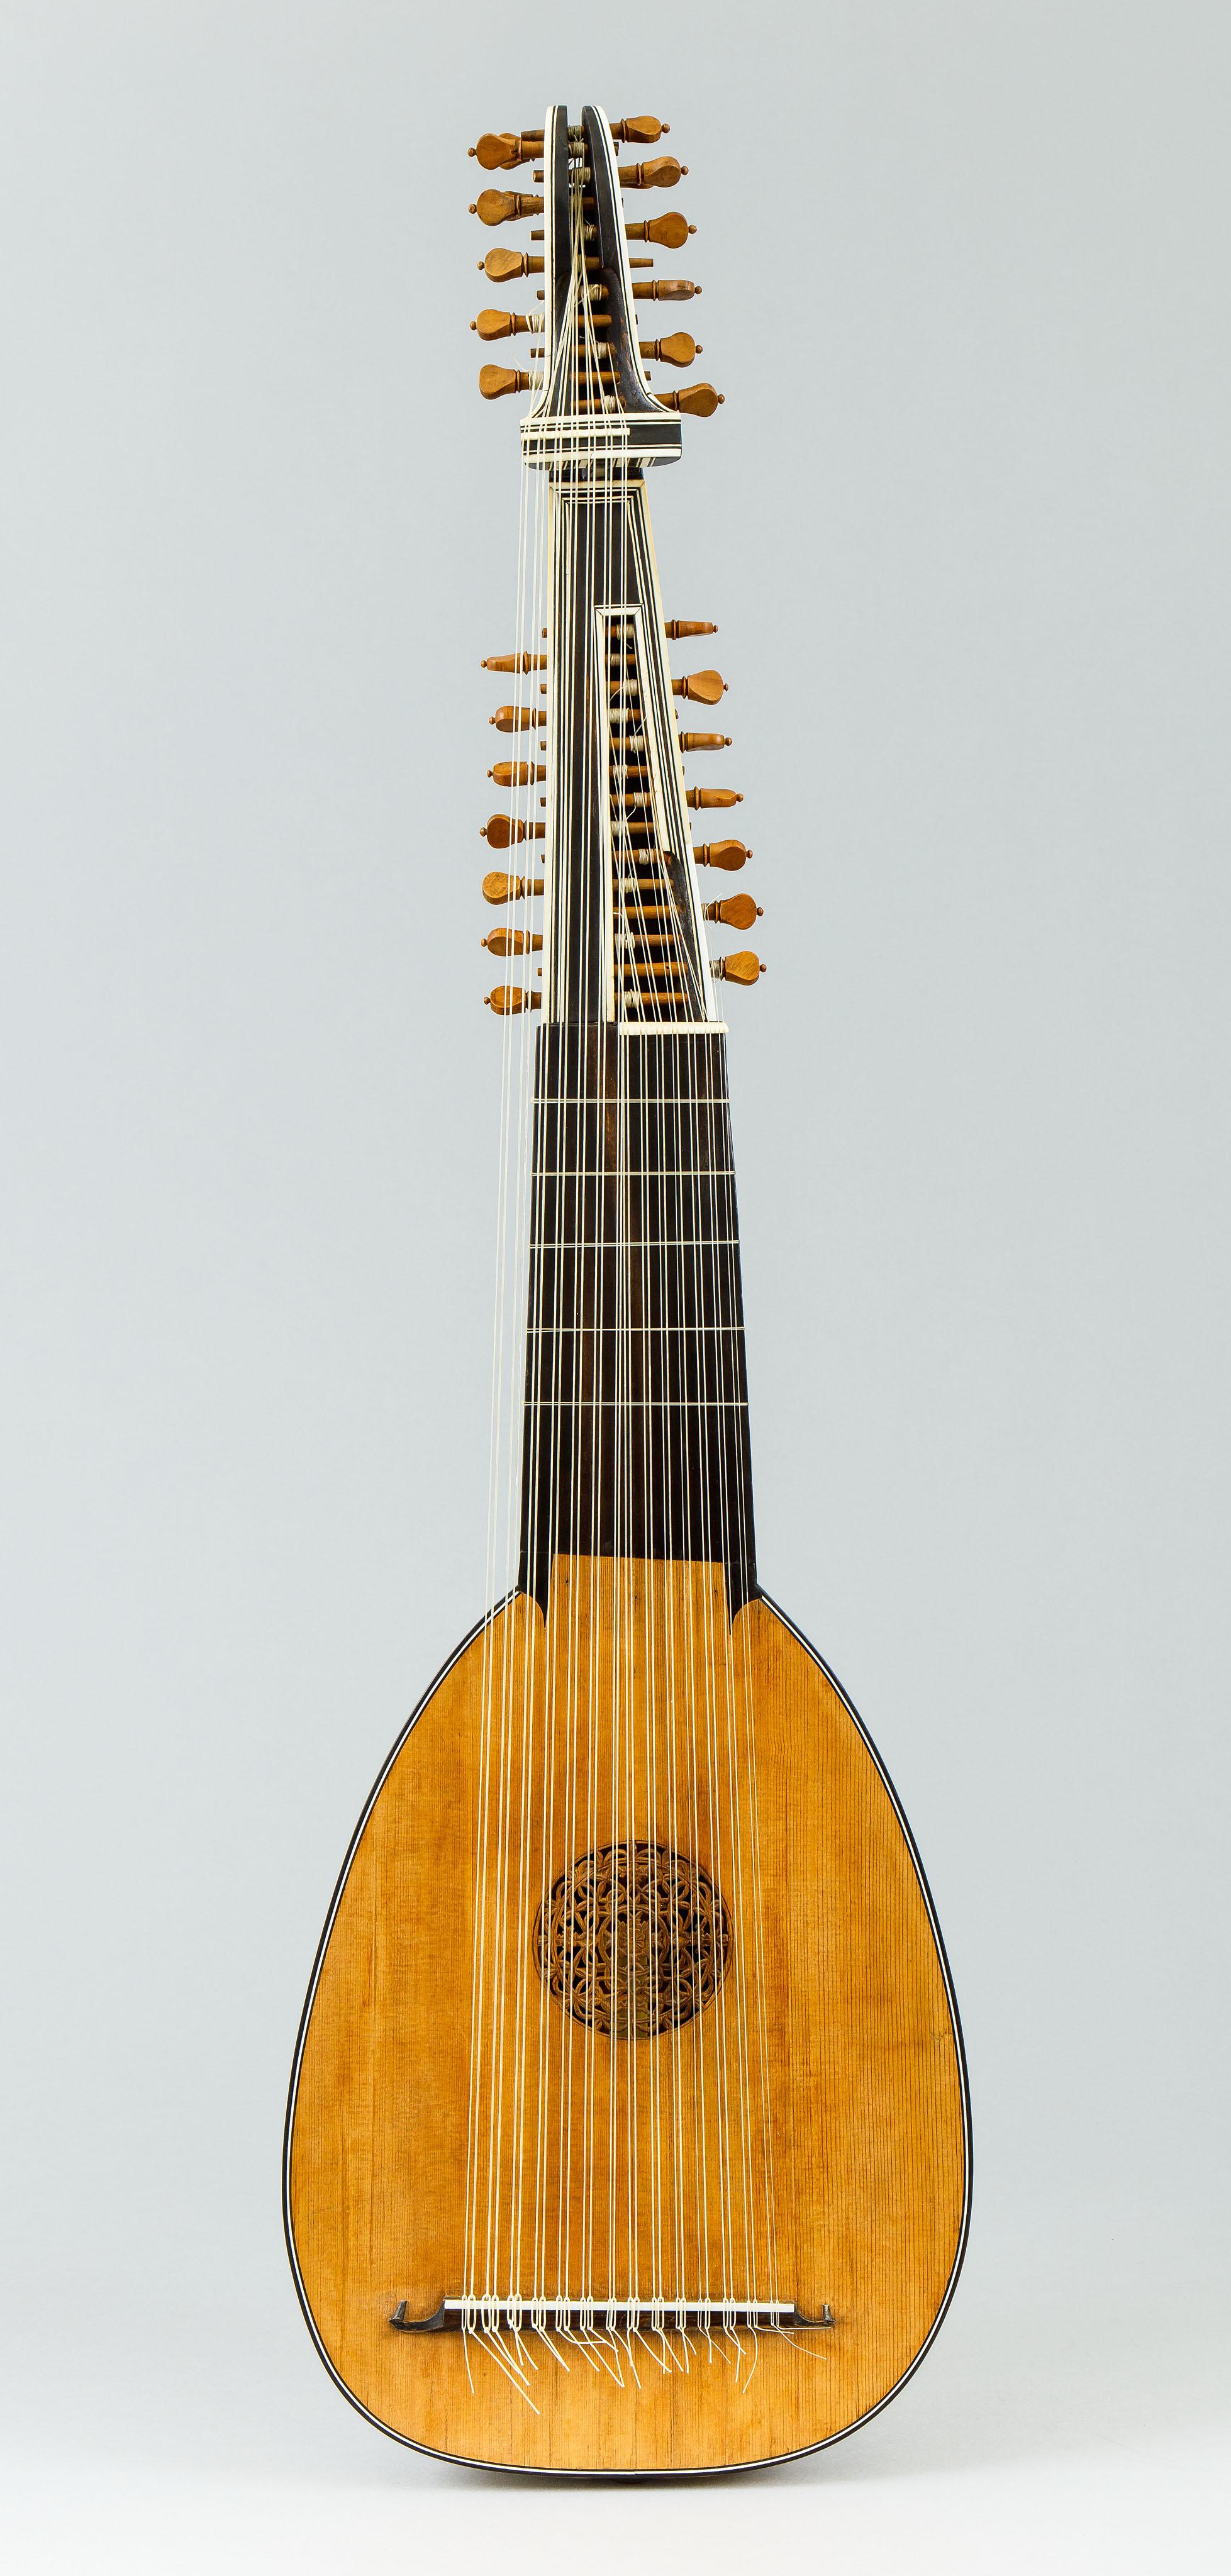 Archlute – Works – National Music Museum